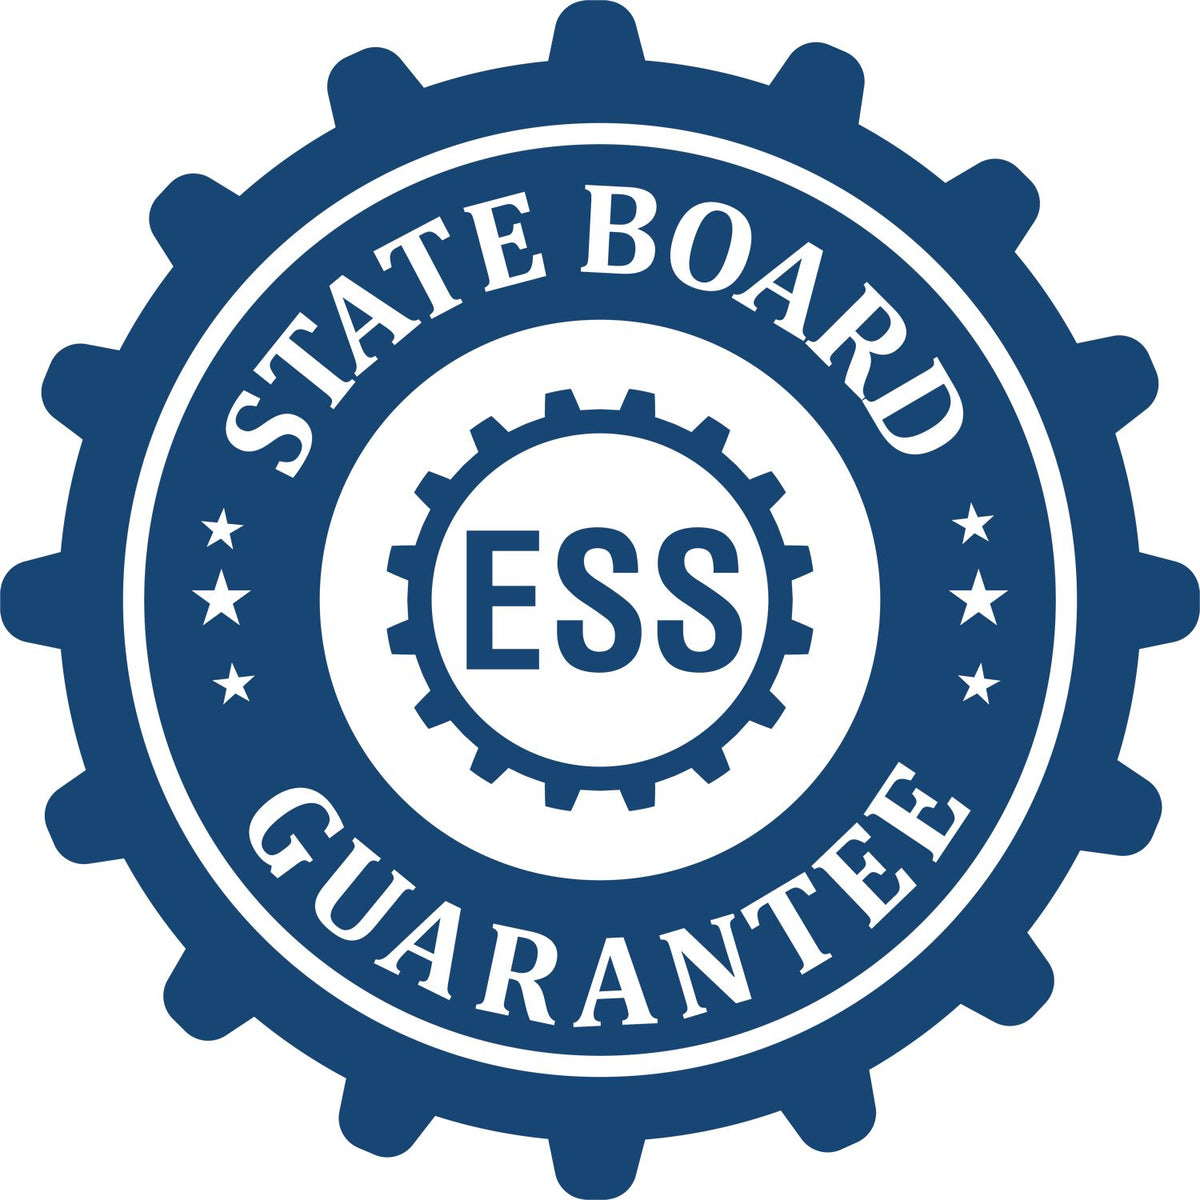 An emblem in a gear shape illustrating a state board guarantee for the State of Texas Extended Long Reach Geologist Seal